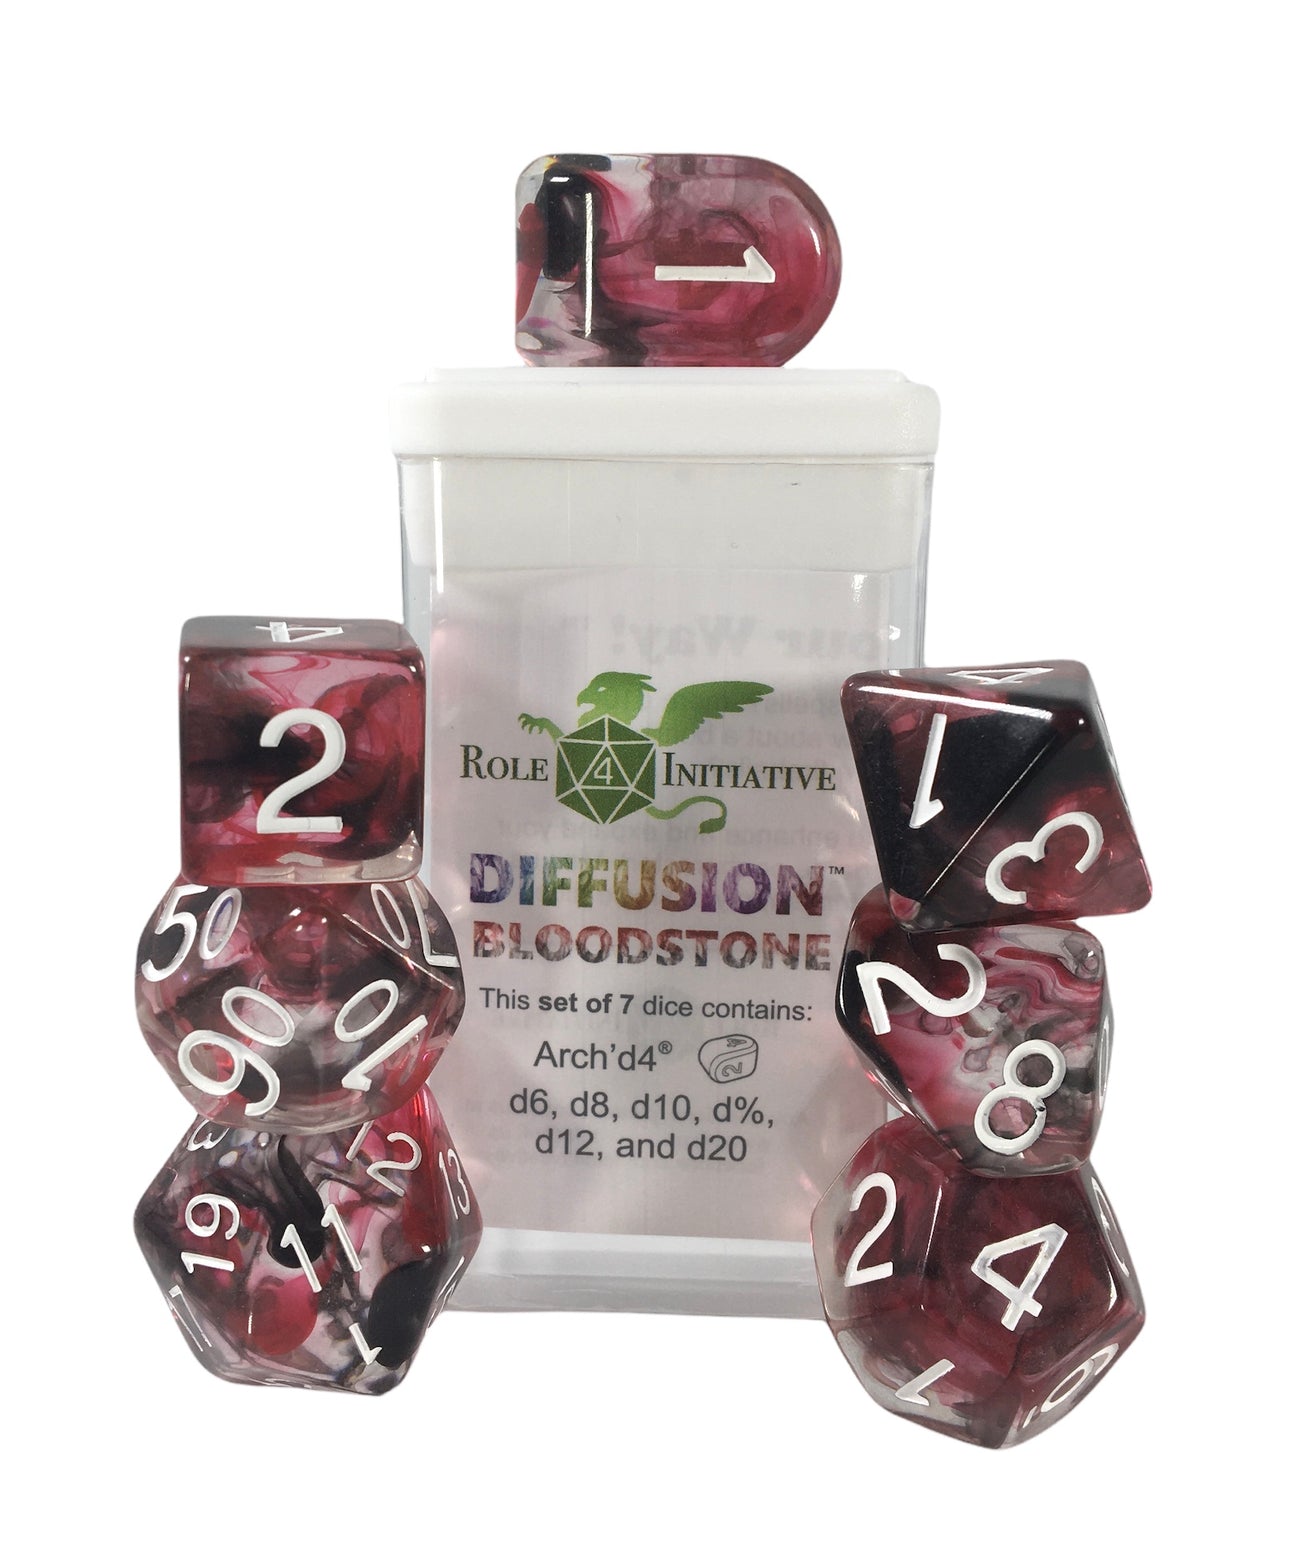 Diffusion Bloodstone - 7 dice set (with Arch’d4™) - The Fourth Place